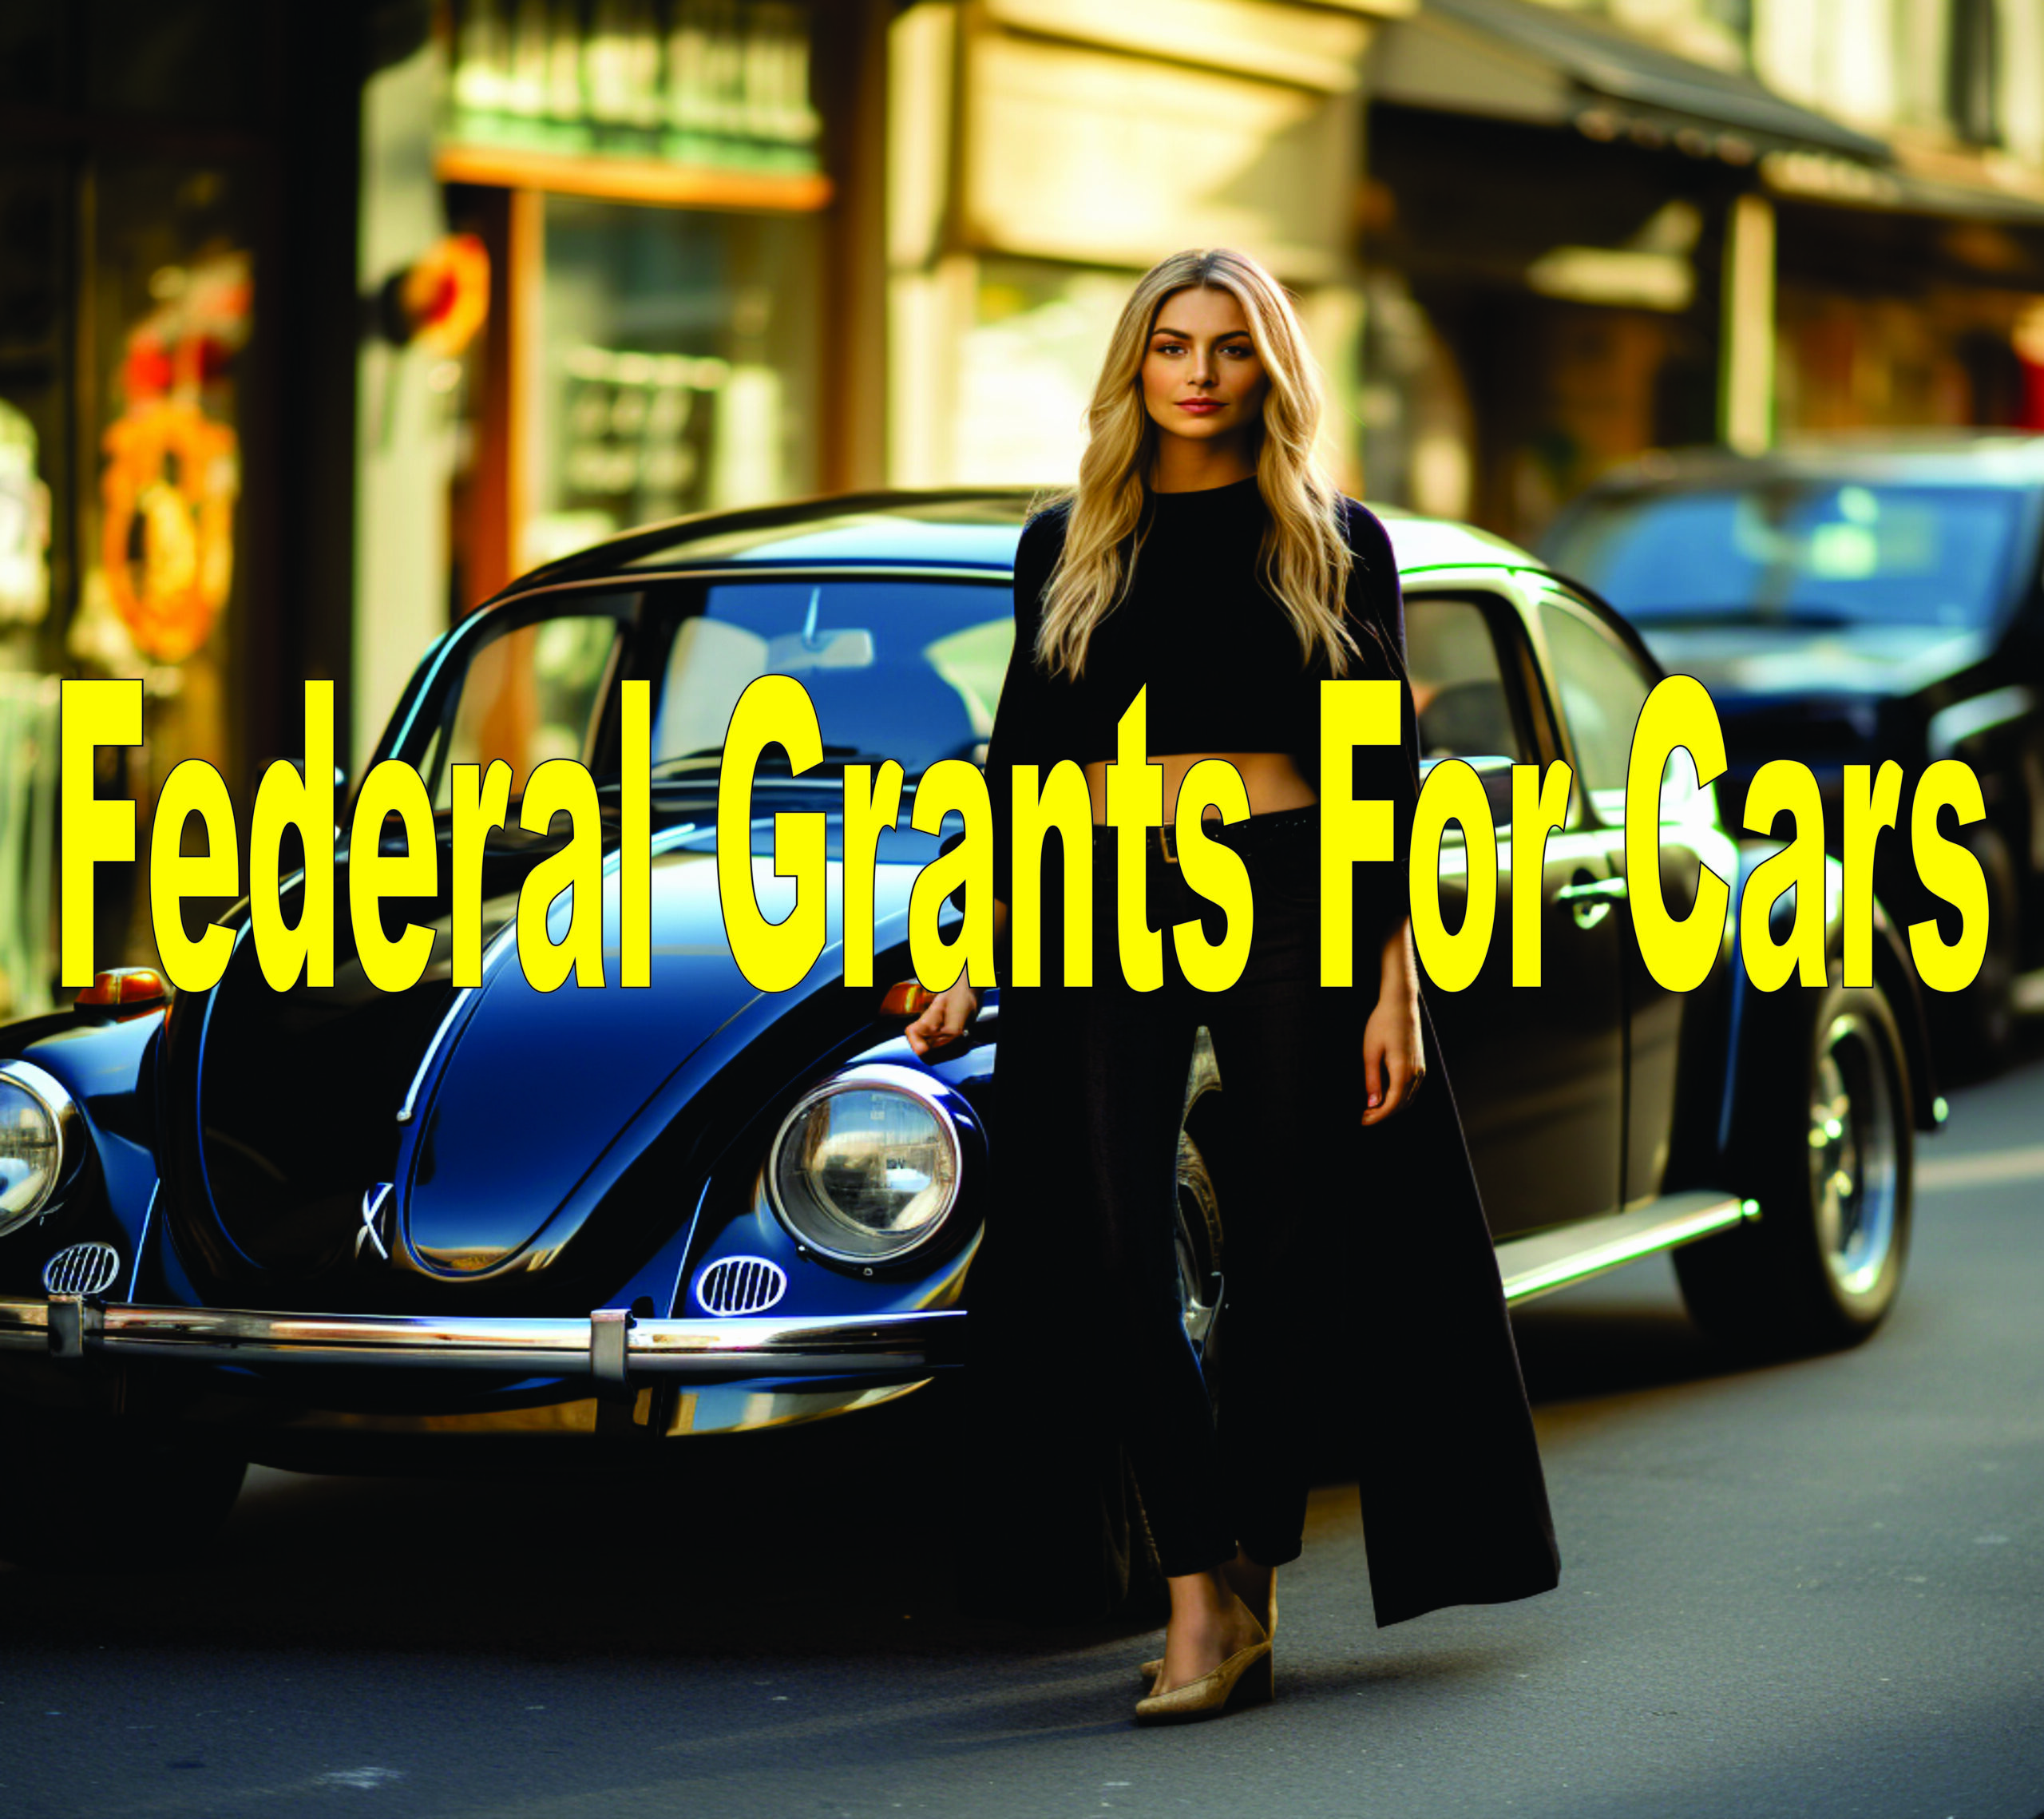 Federal Grants For Cars